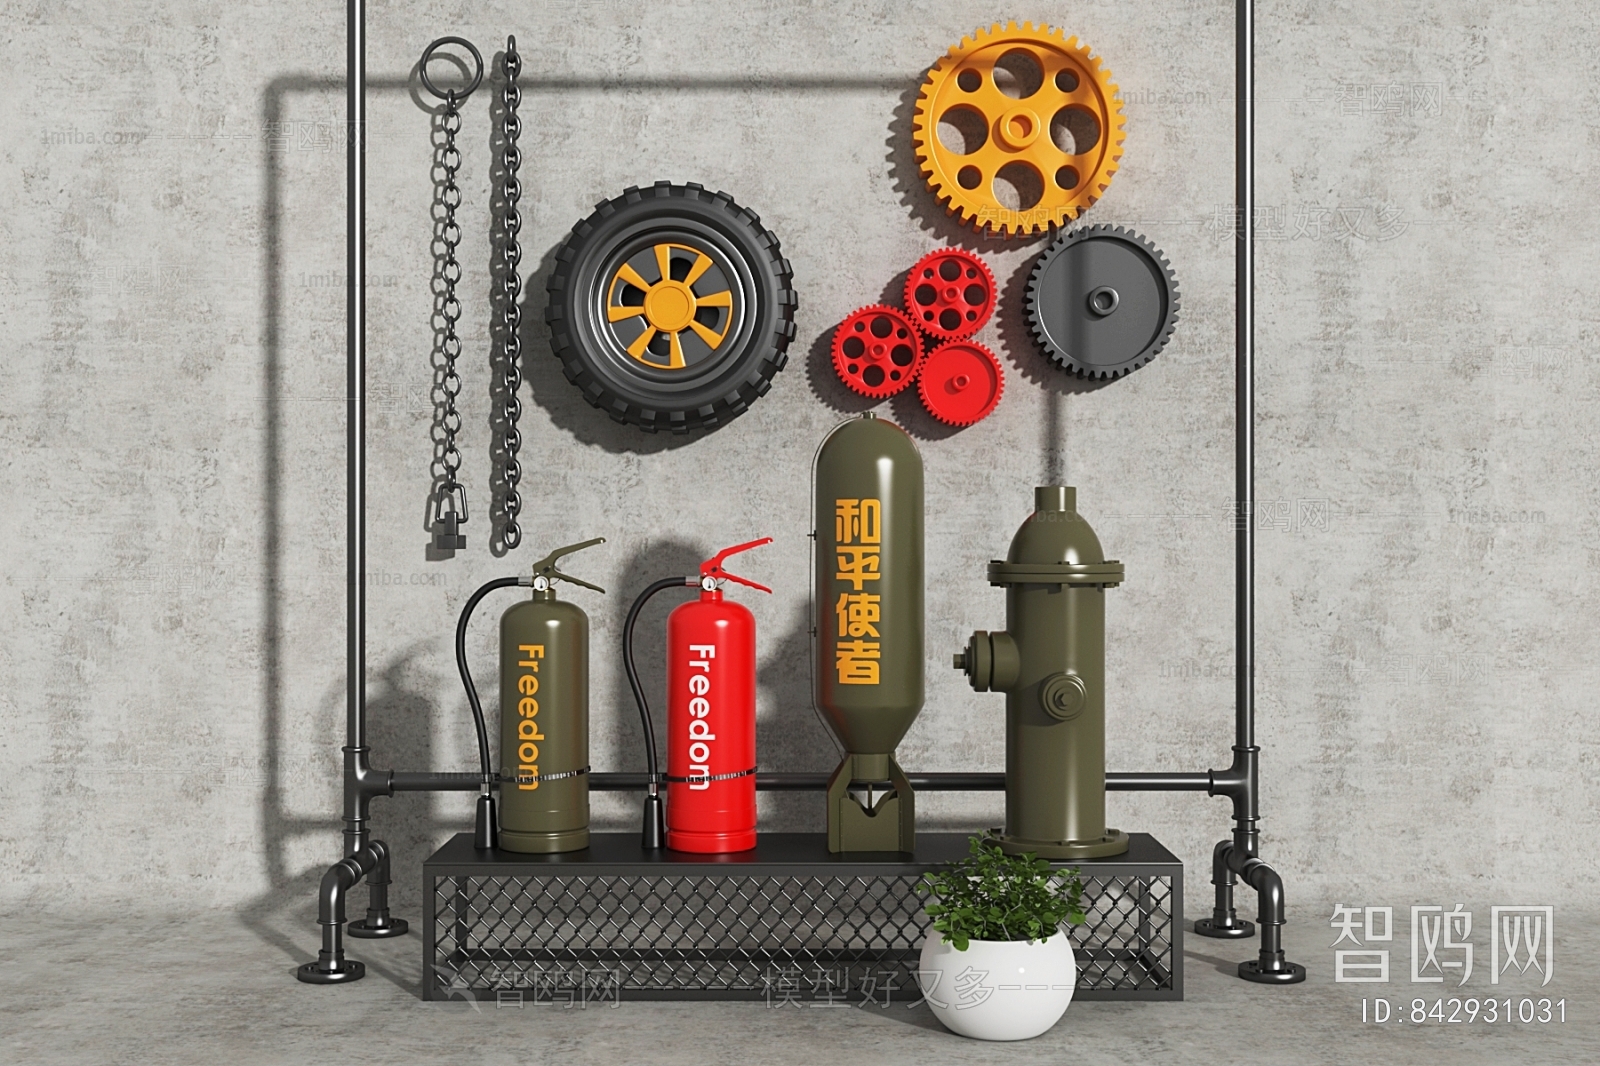 Industrial Style Fire-fighting Equipment